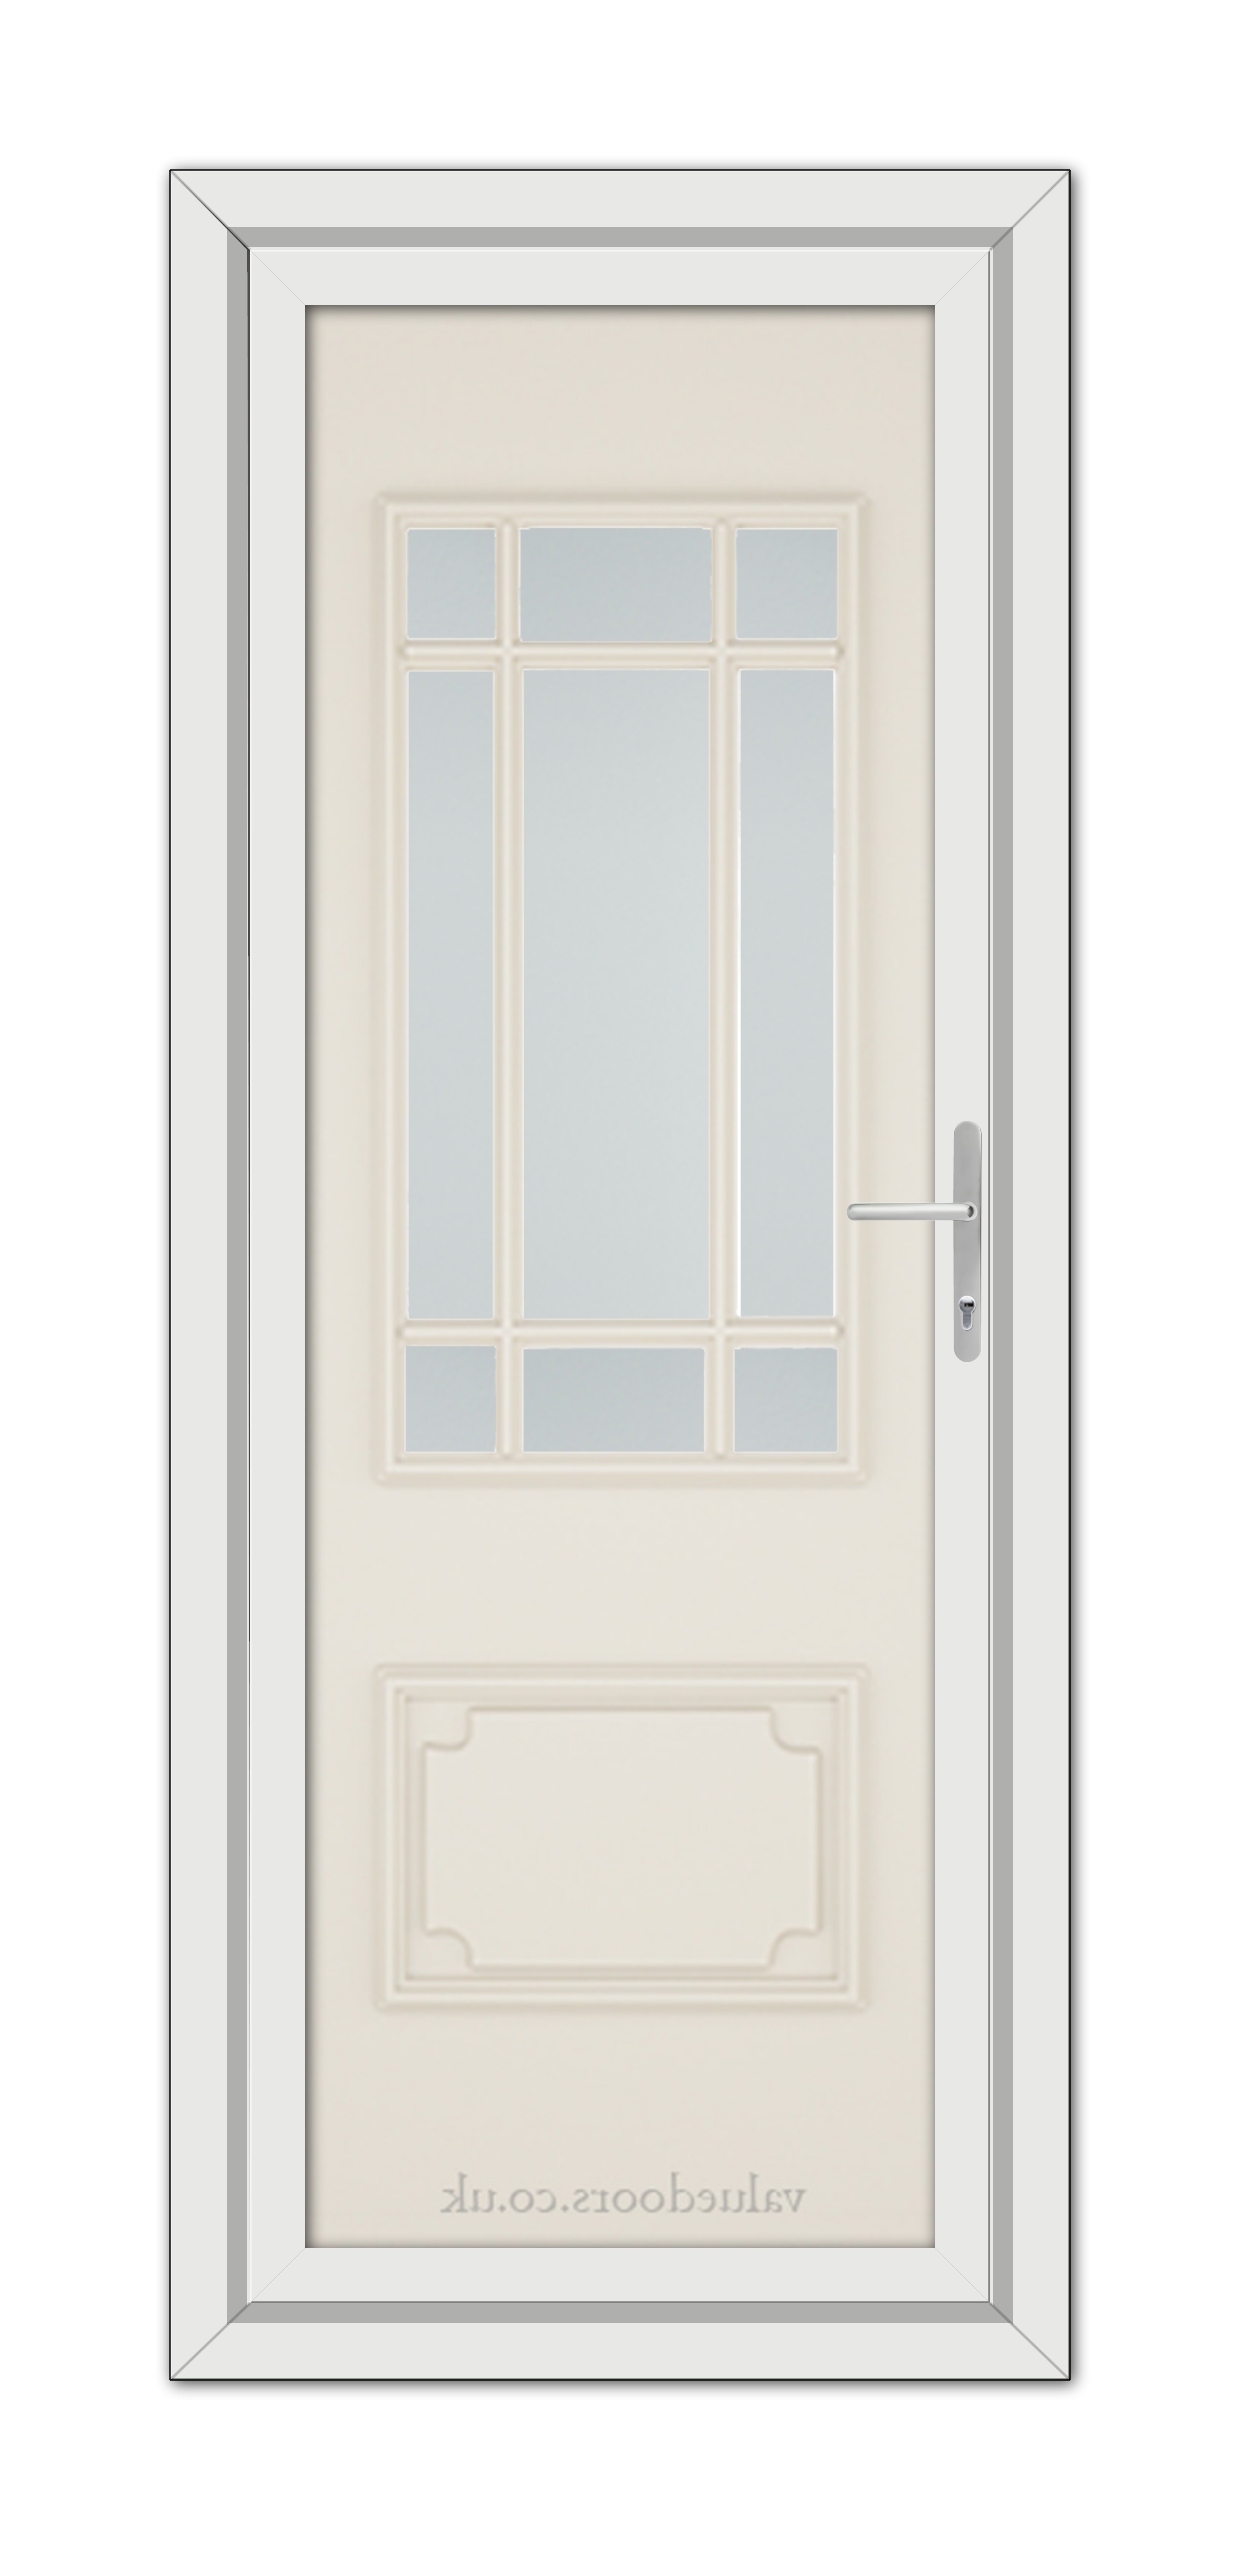 A vertical image of a closed Cream Seville uPVC Door with a small window featuring white muntins and a metal handle, set within a door frame.